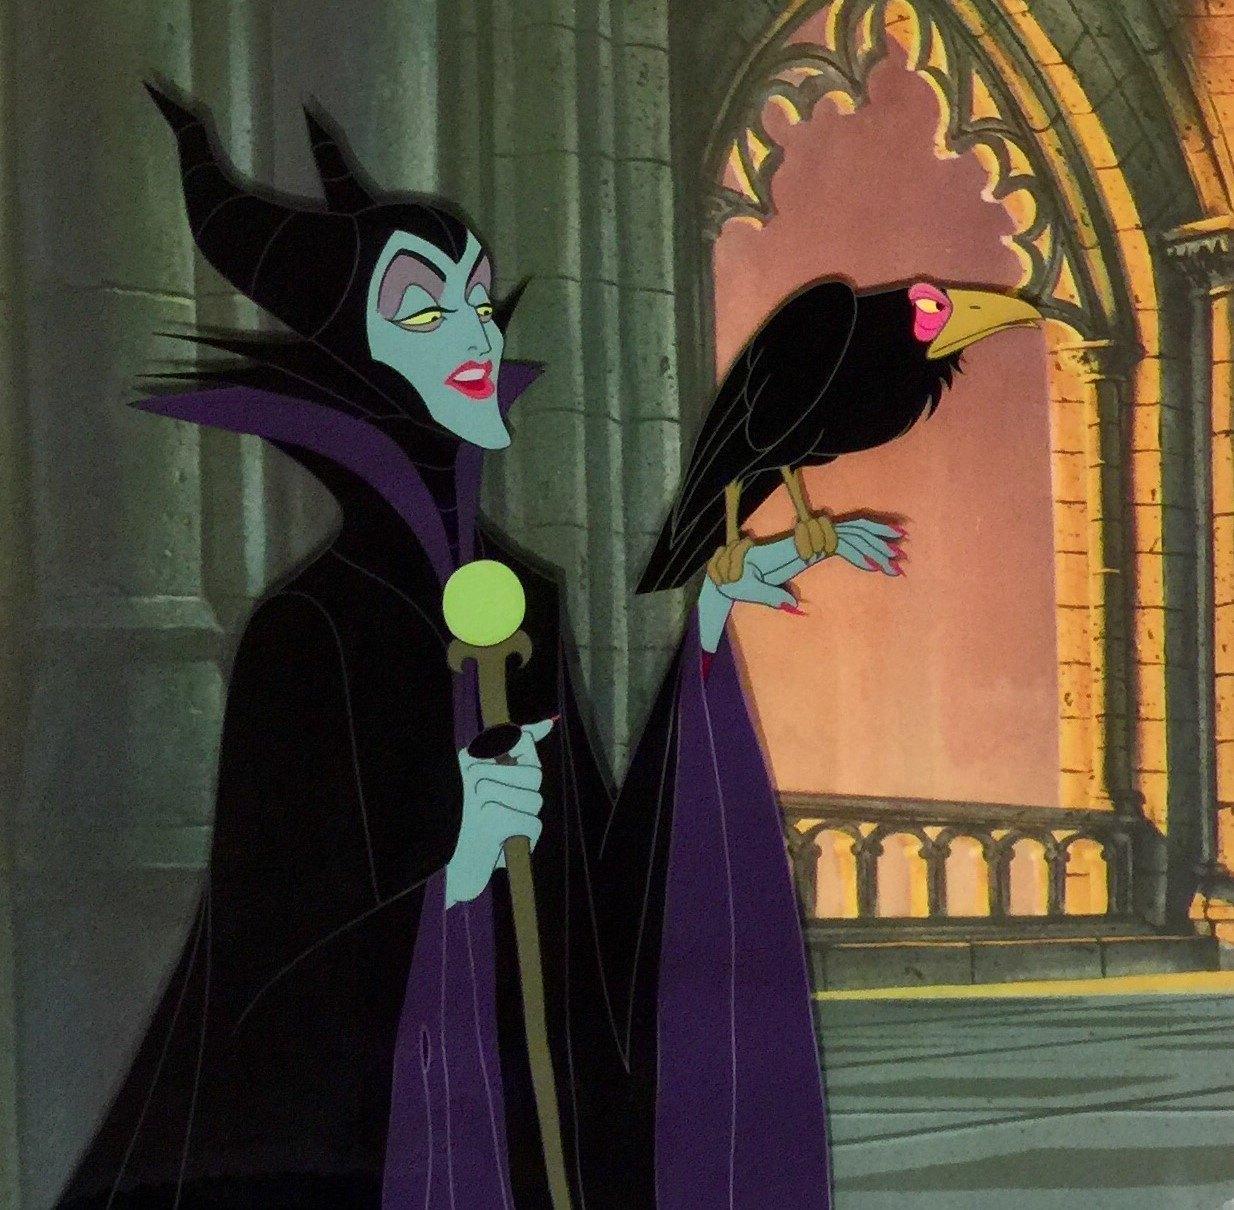 14 Facts About Maleficent (Sleeping Beauty) - Facts.net